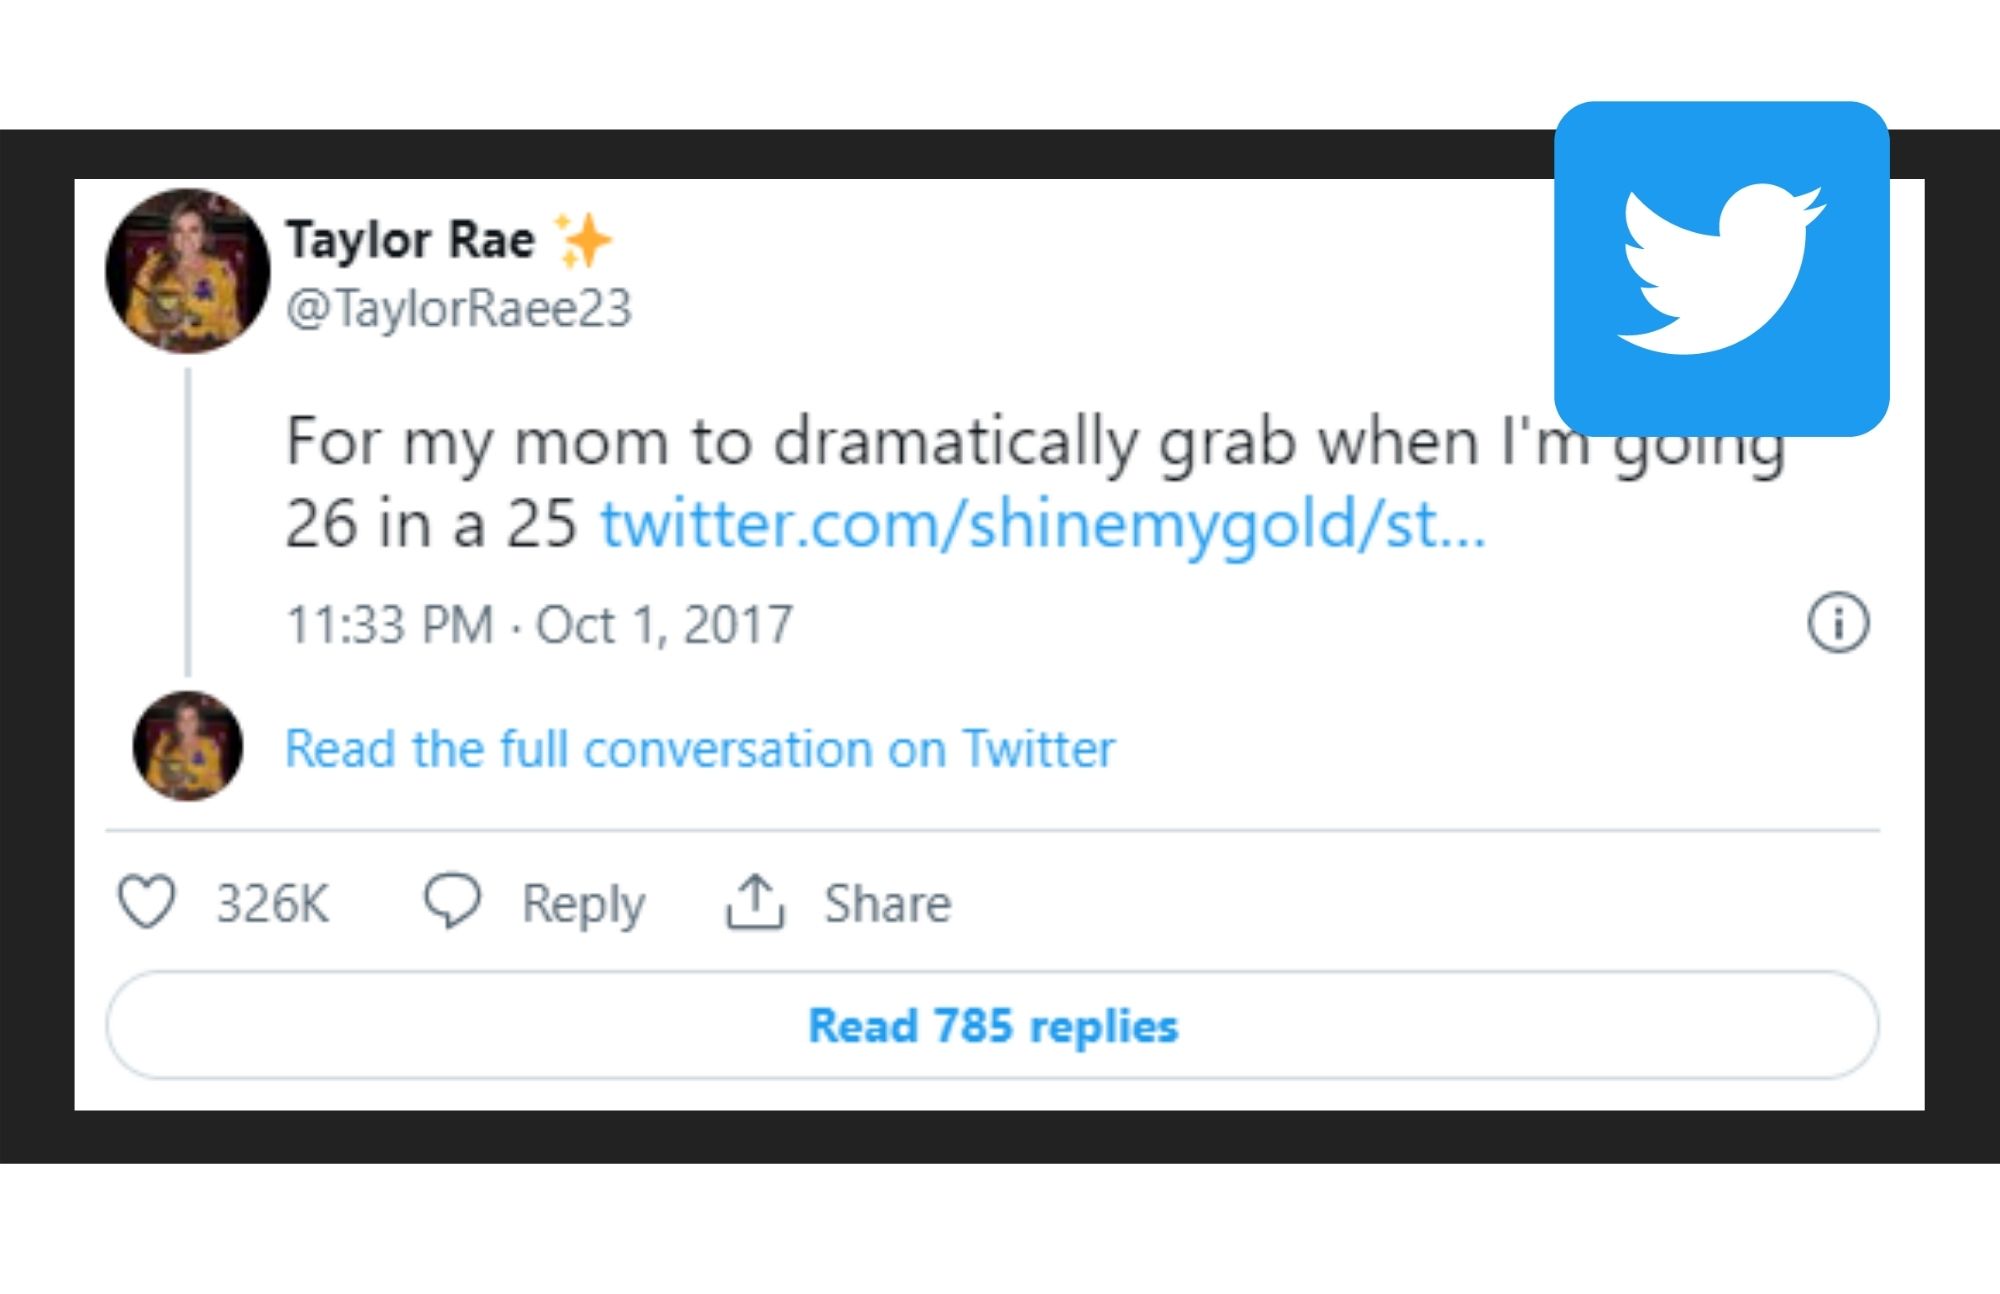 Taylor Rae posts and twitter logo on the upper right corner